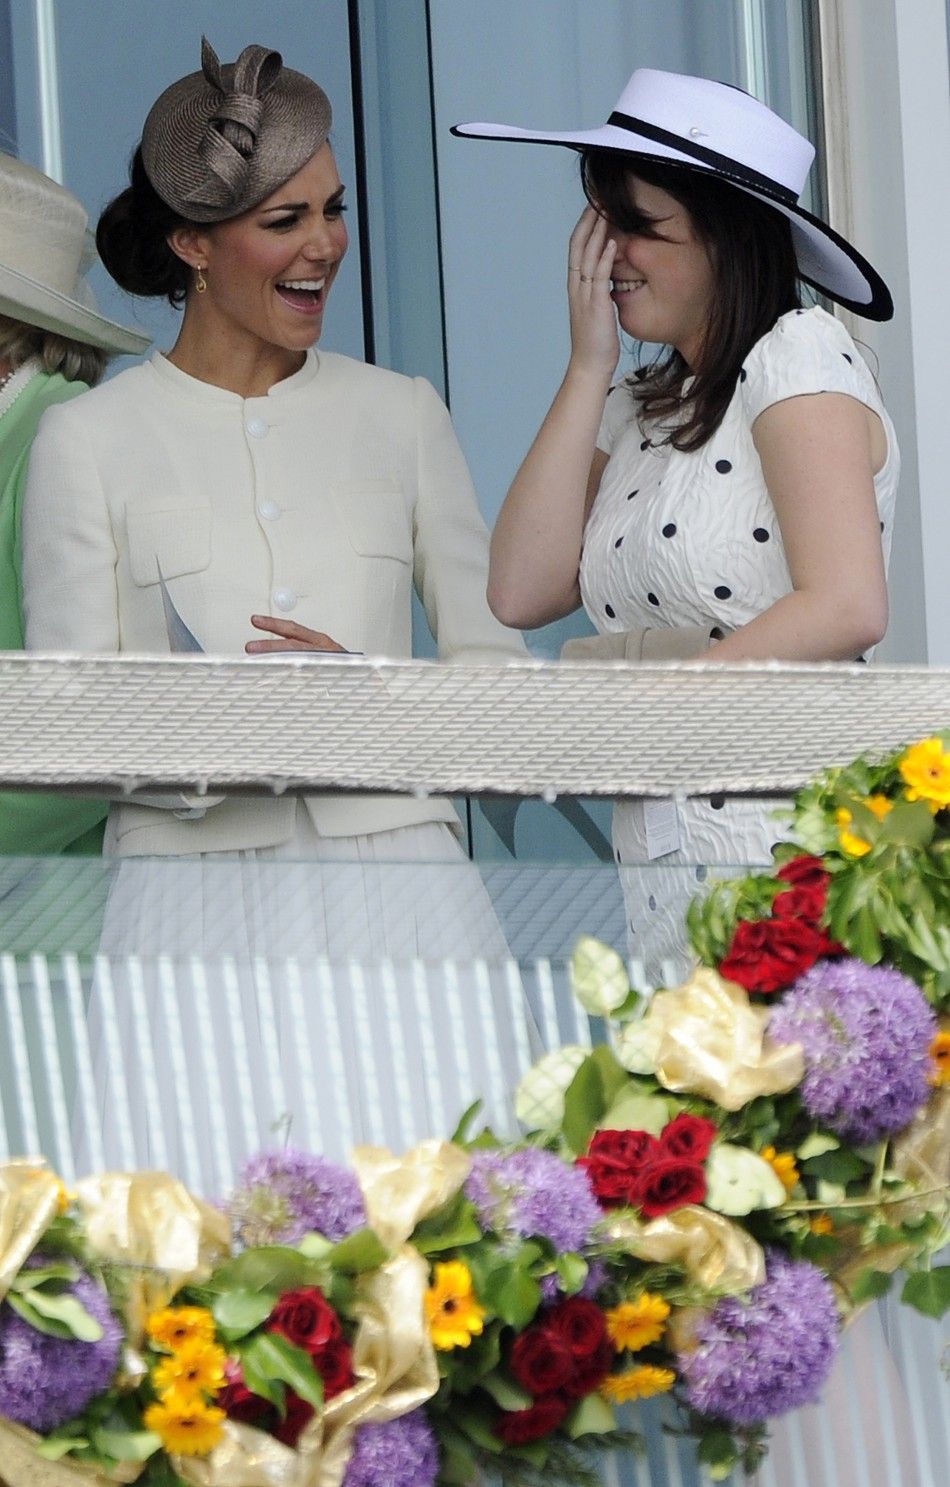 Kate experiments new look at the 2011 Epsom Derby Festival.